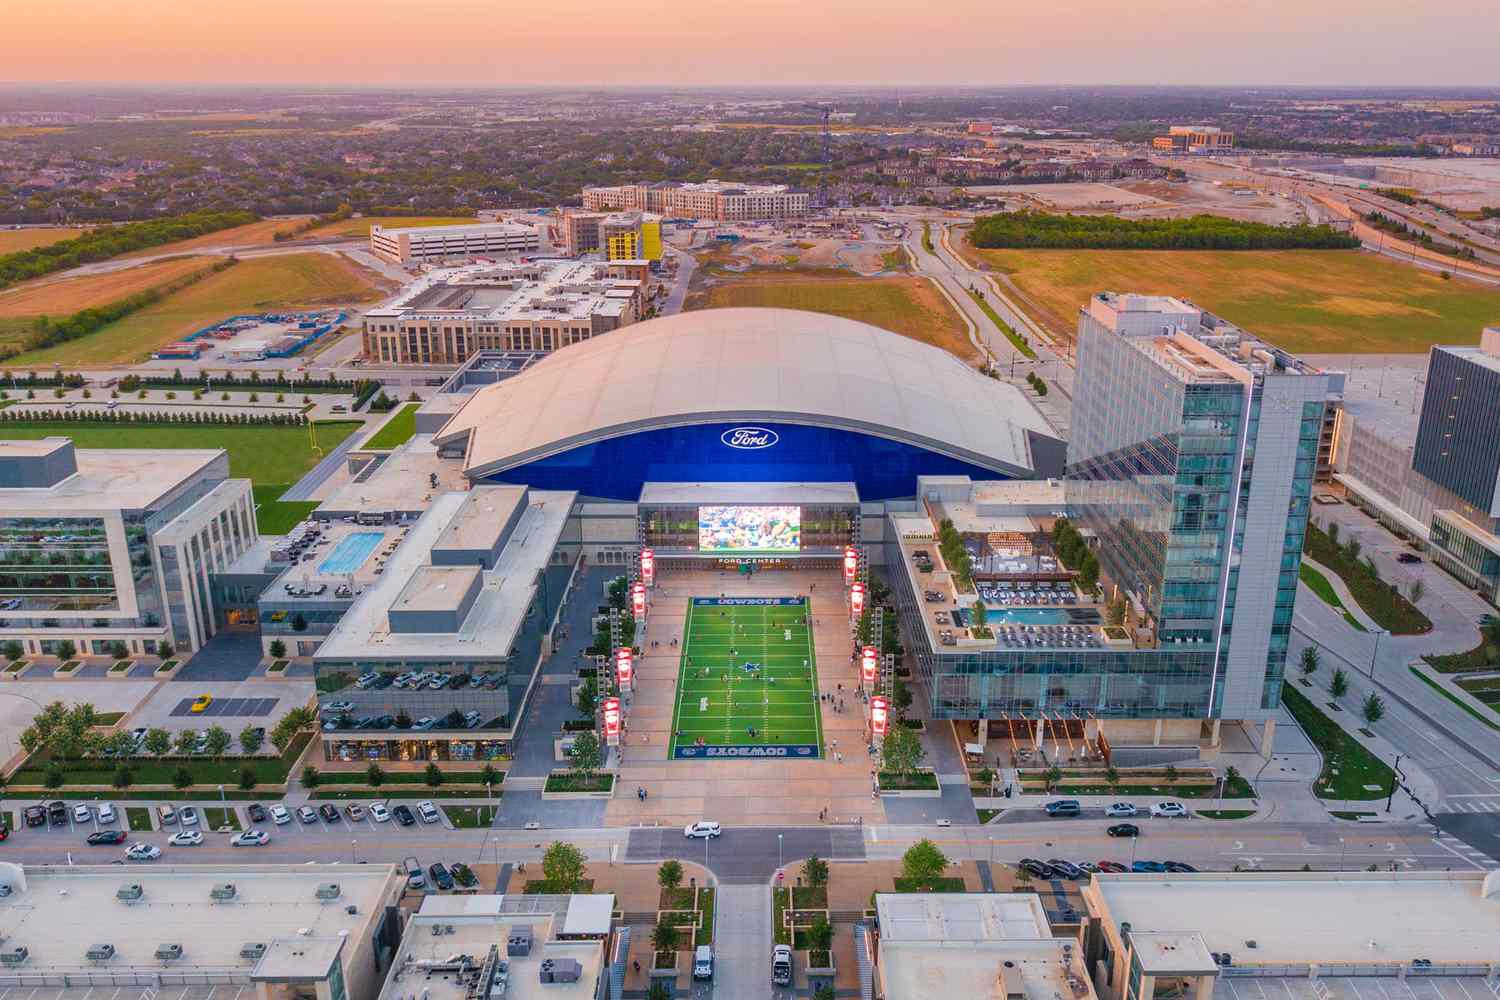 14-facts-about-prominent-industries-and-economic-development-in-frisco-texas